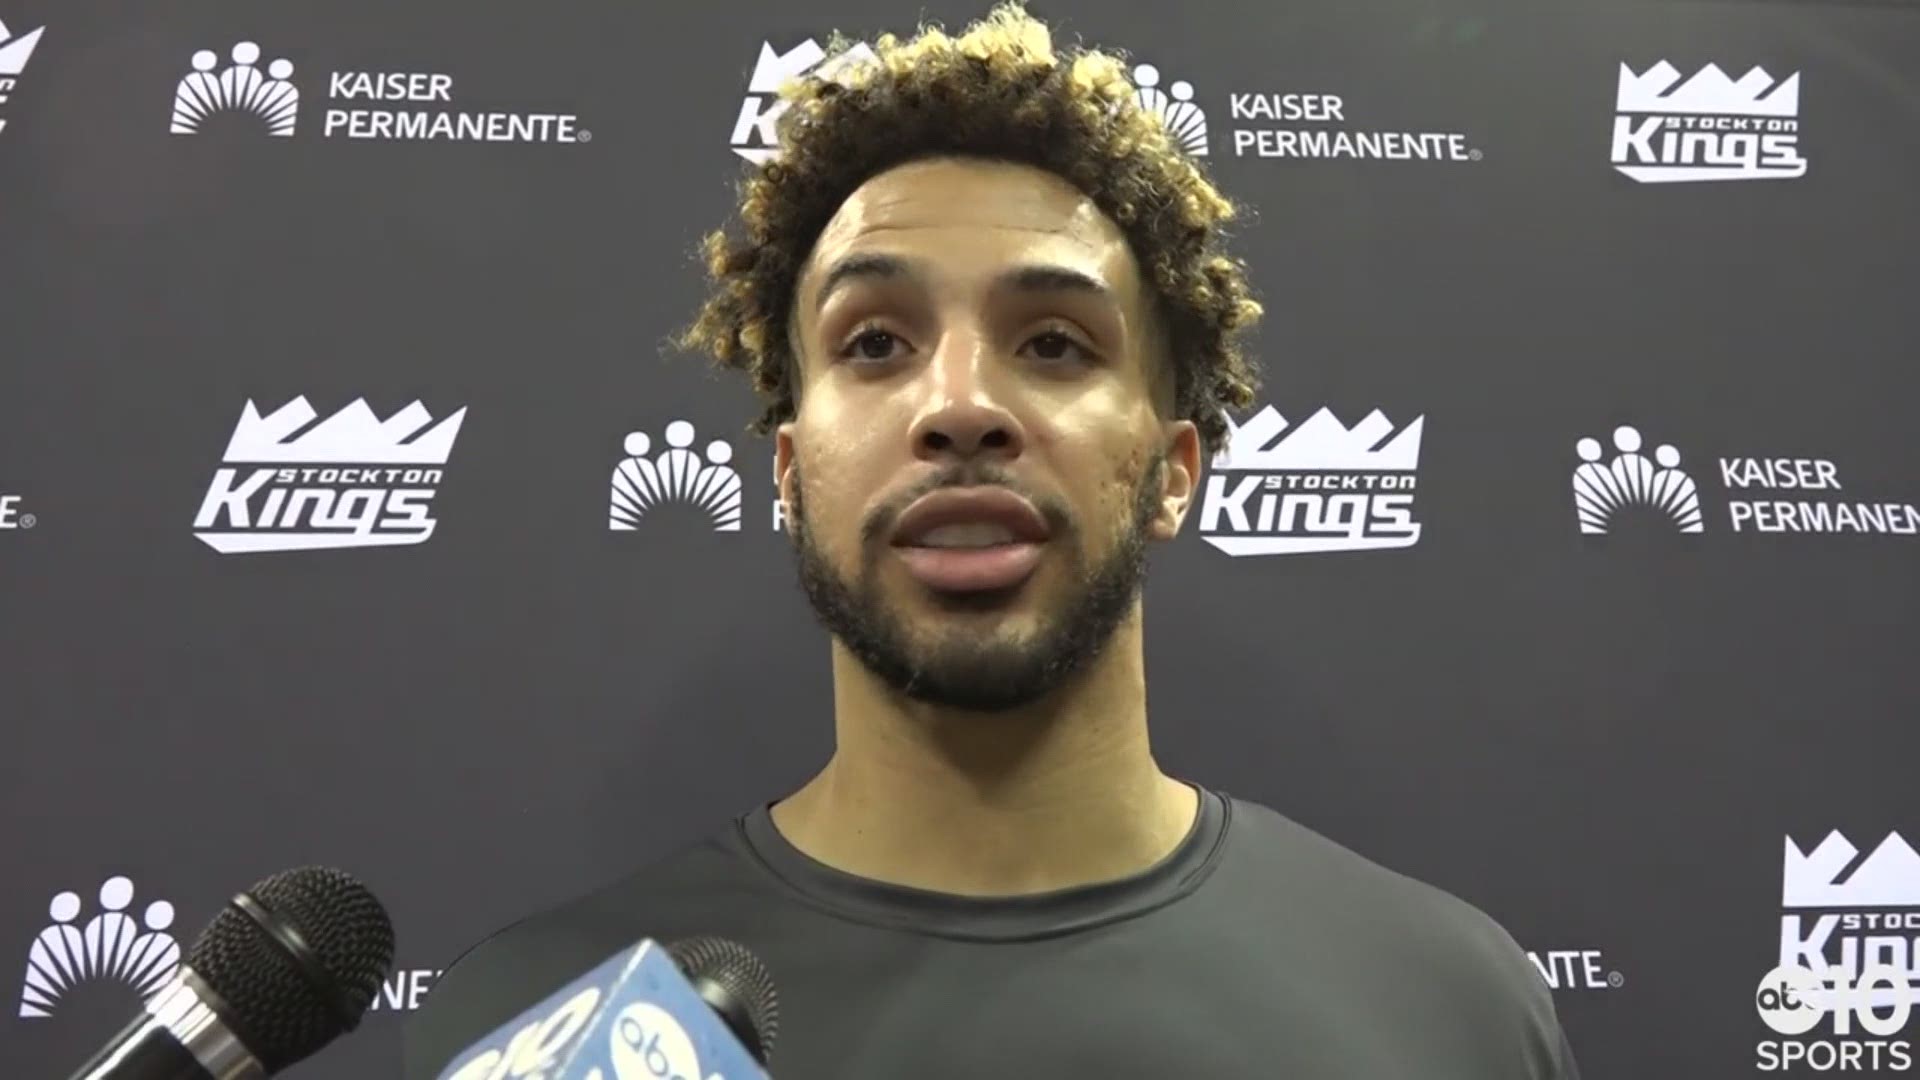 Following Wednesday's heartbreaking loss to Memphis in the opening round of the G-League playoffs, Cody Demps of the Stockton Kings talks about rallying the team to re-take the lead trailing by 18 in the fourth quarter, and looking to join the Sacramento Kings during their road trip with the hopes of making his NBA debut with his hometown team.